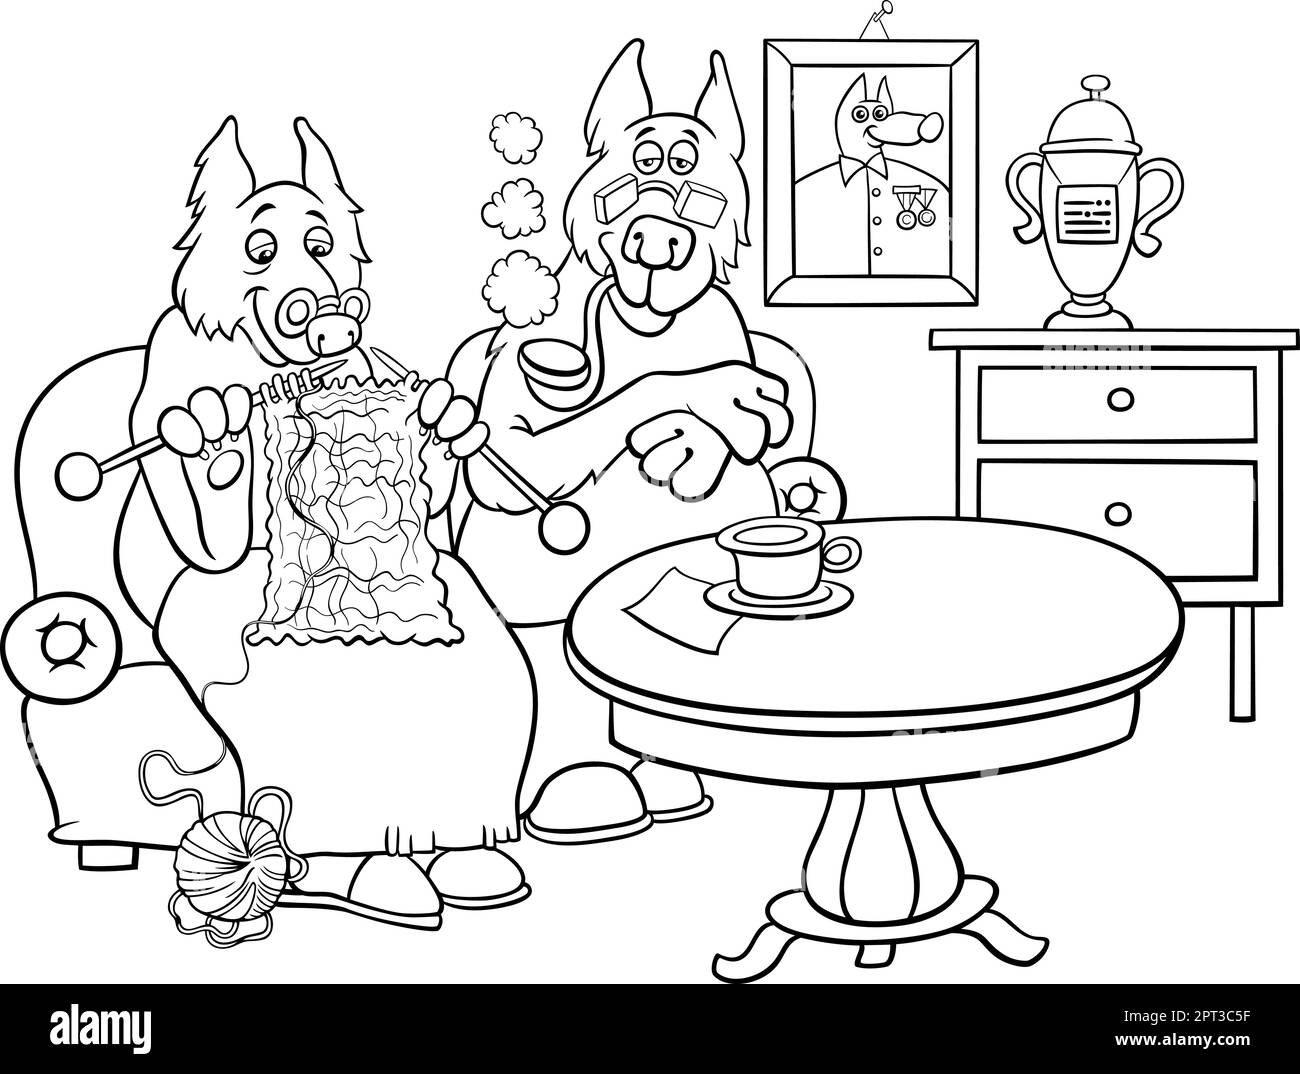 cartoon senior dog characters couple coloring page Stock Vector